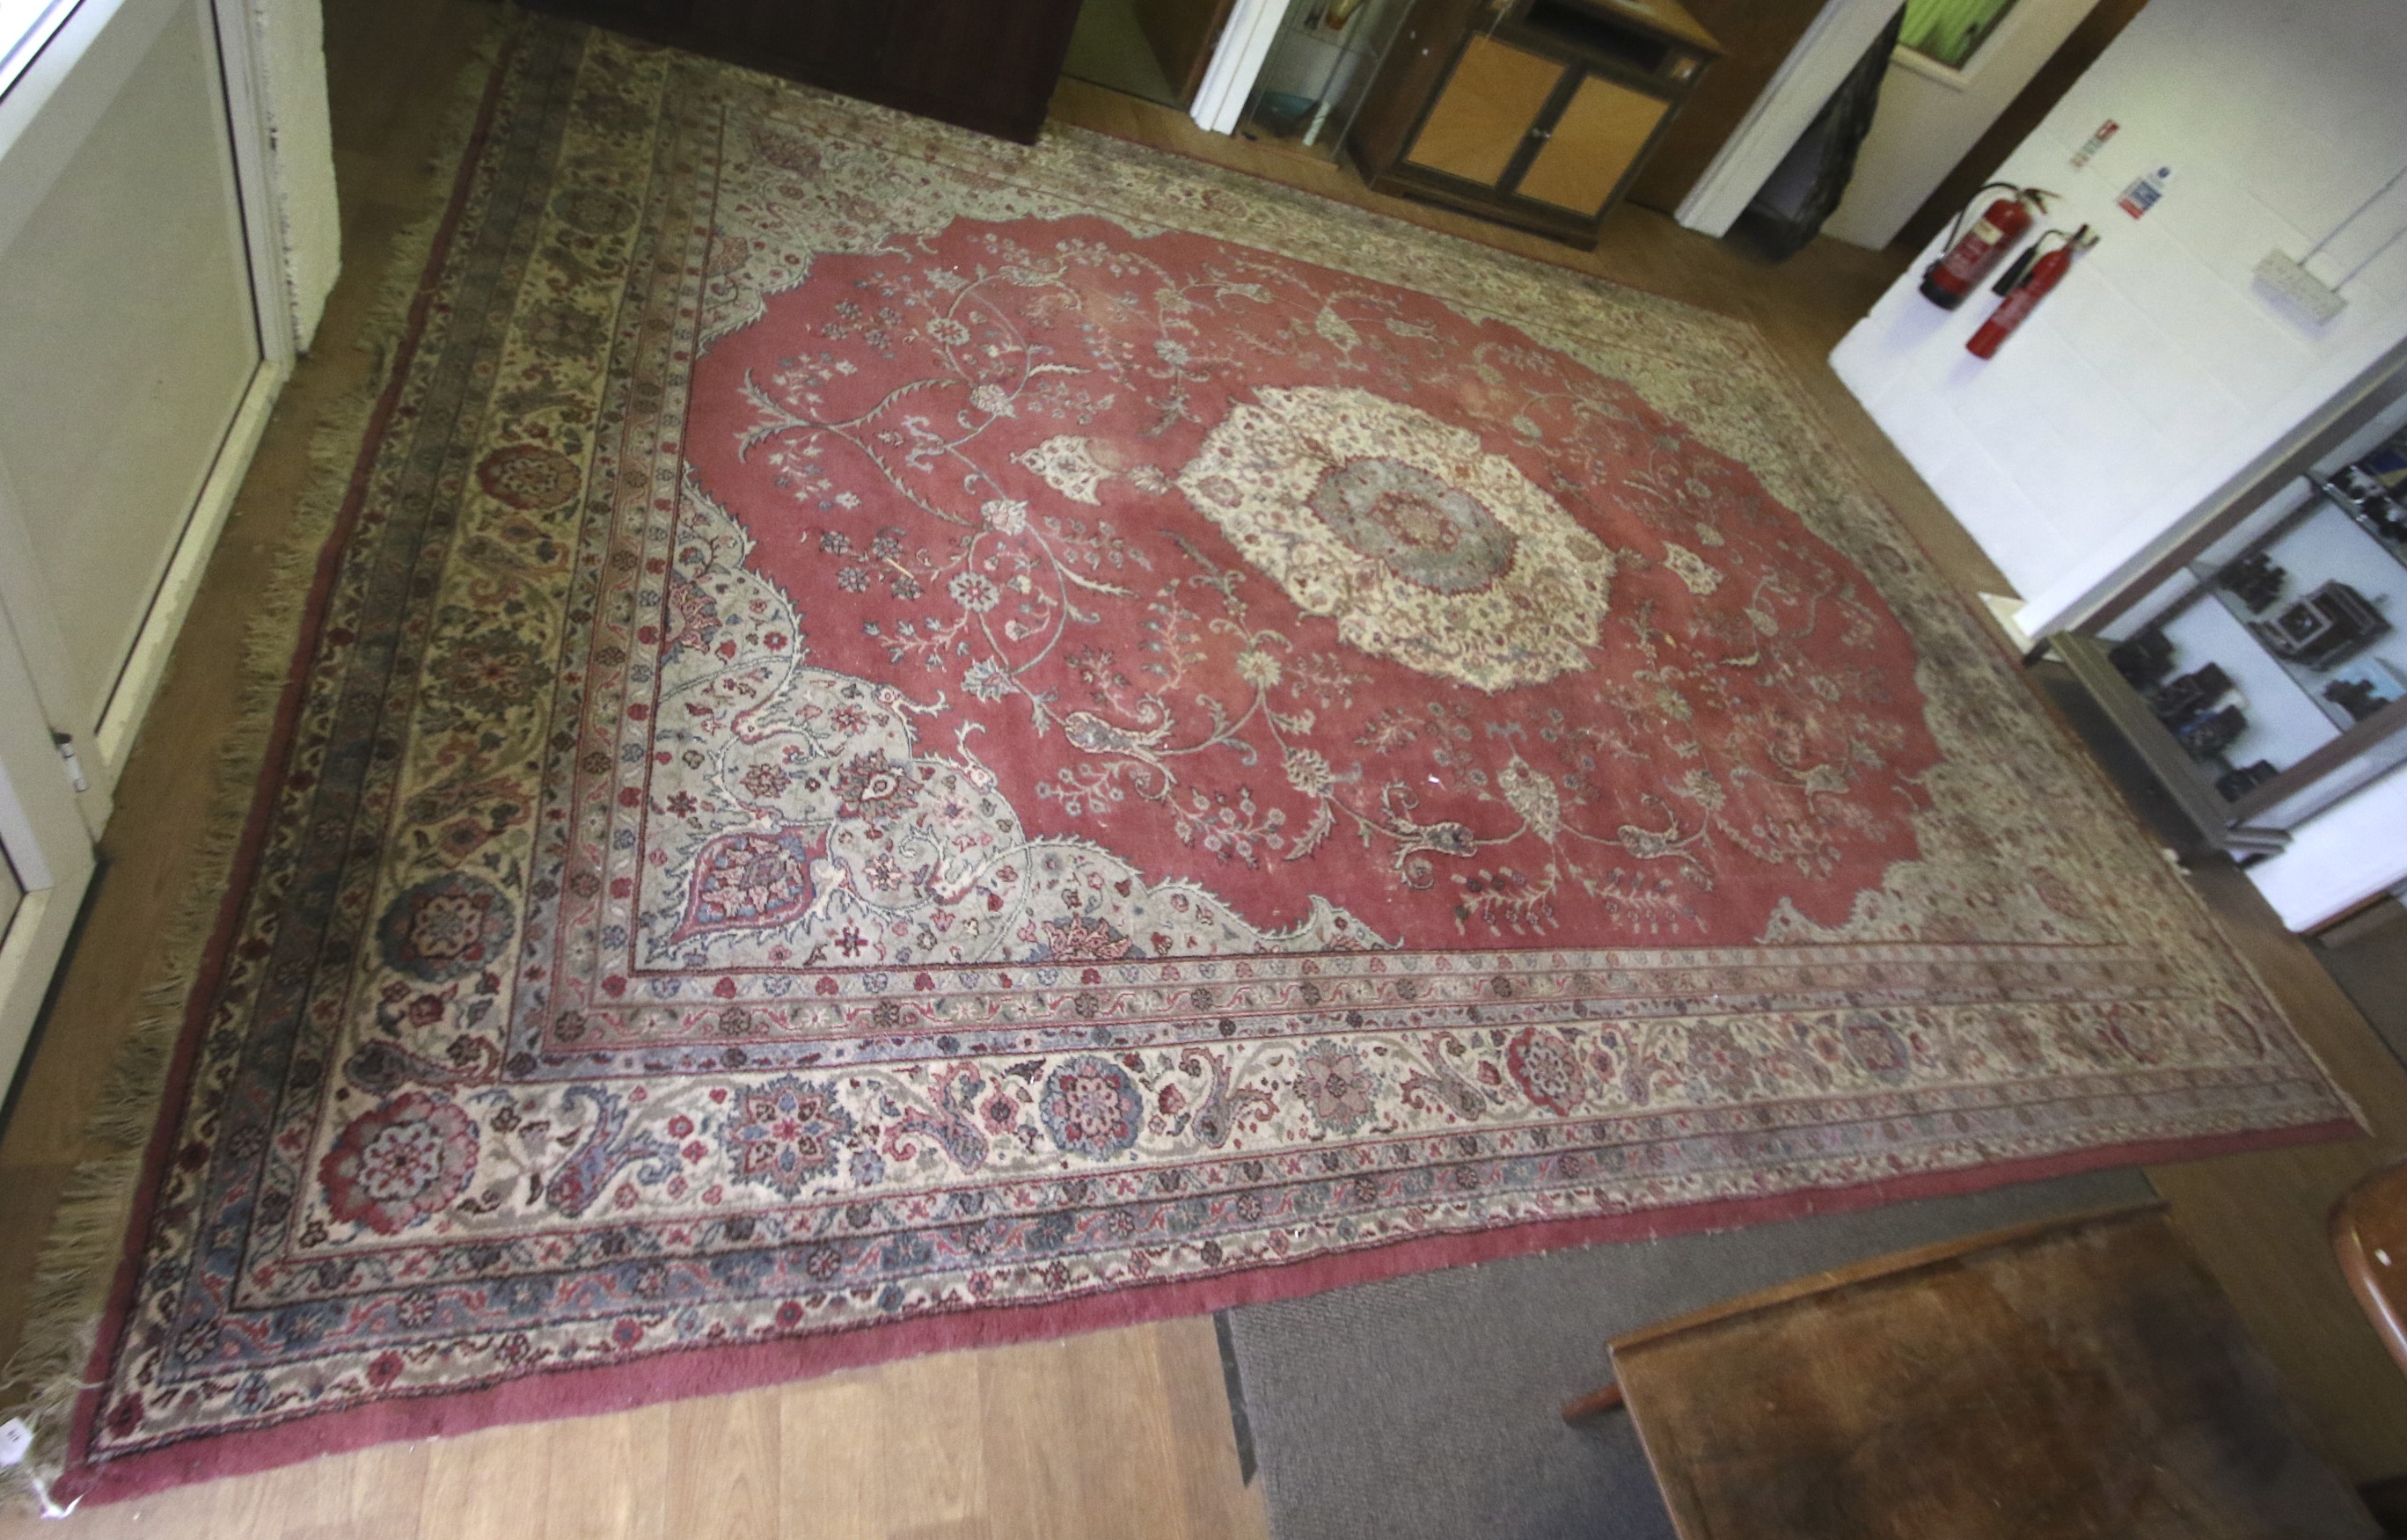 A large Persian rug.